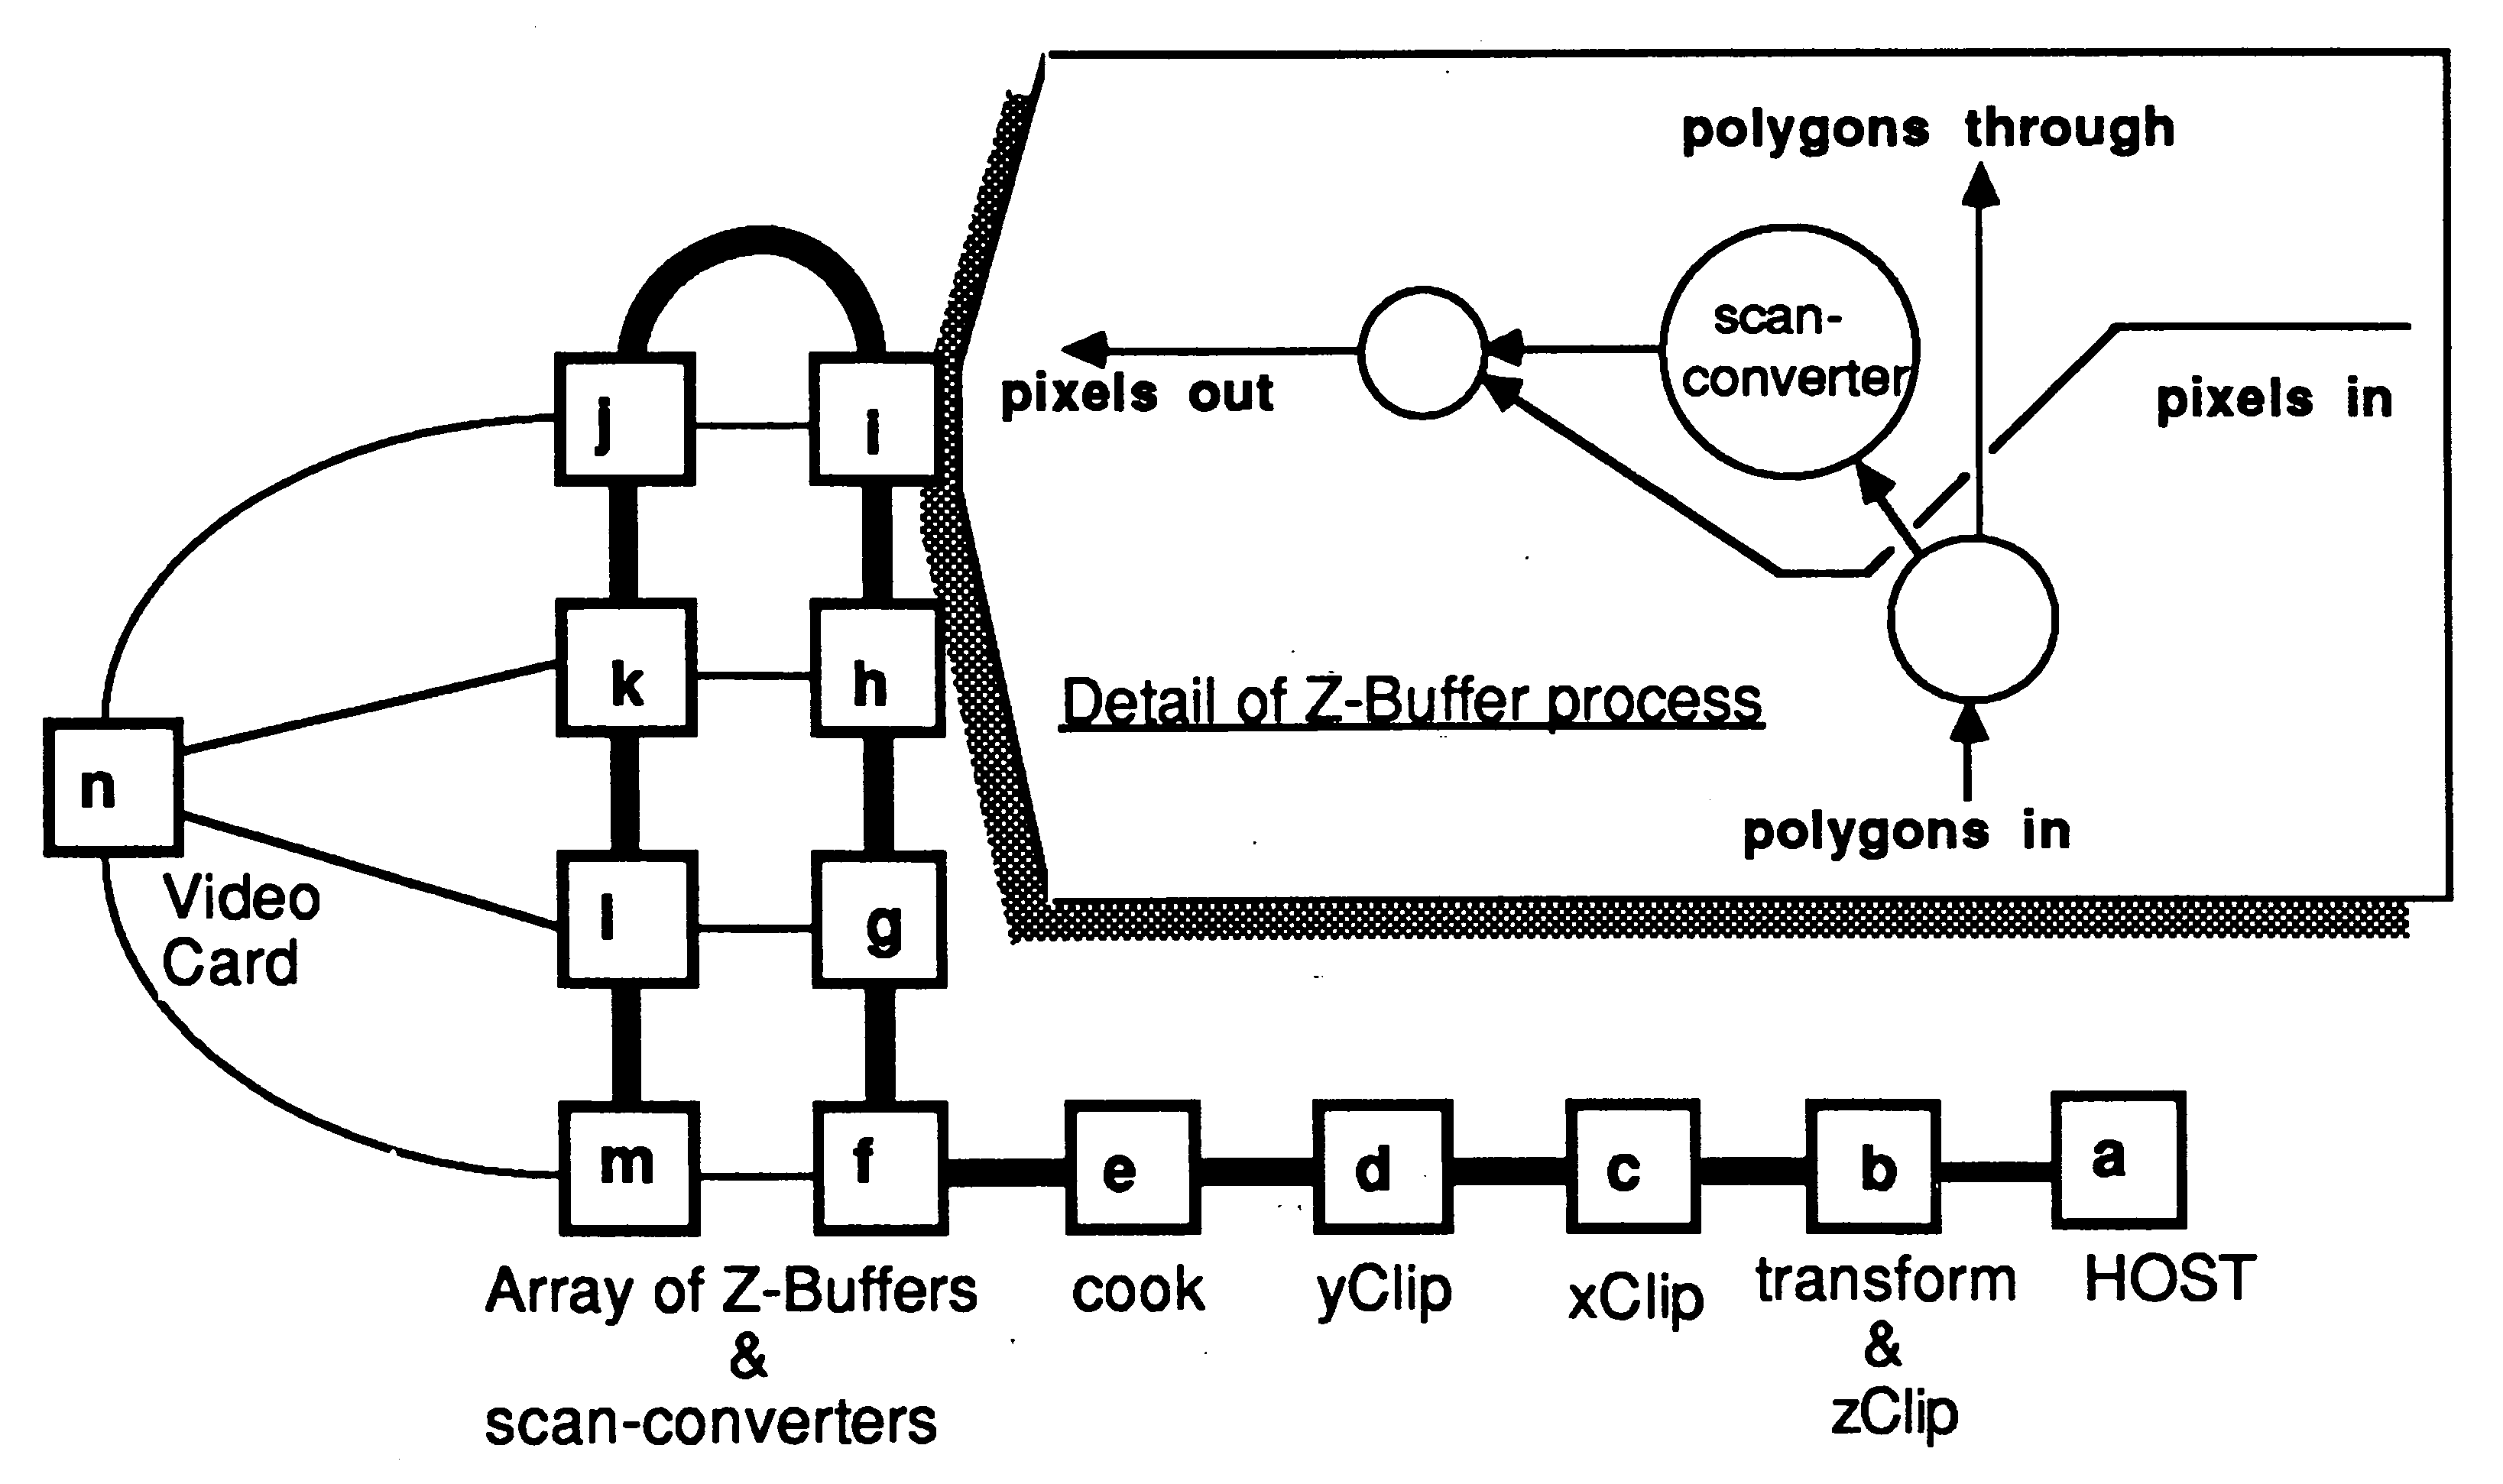 Distributed Z-buffer architecture